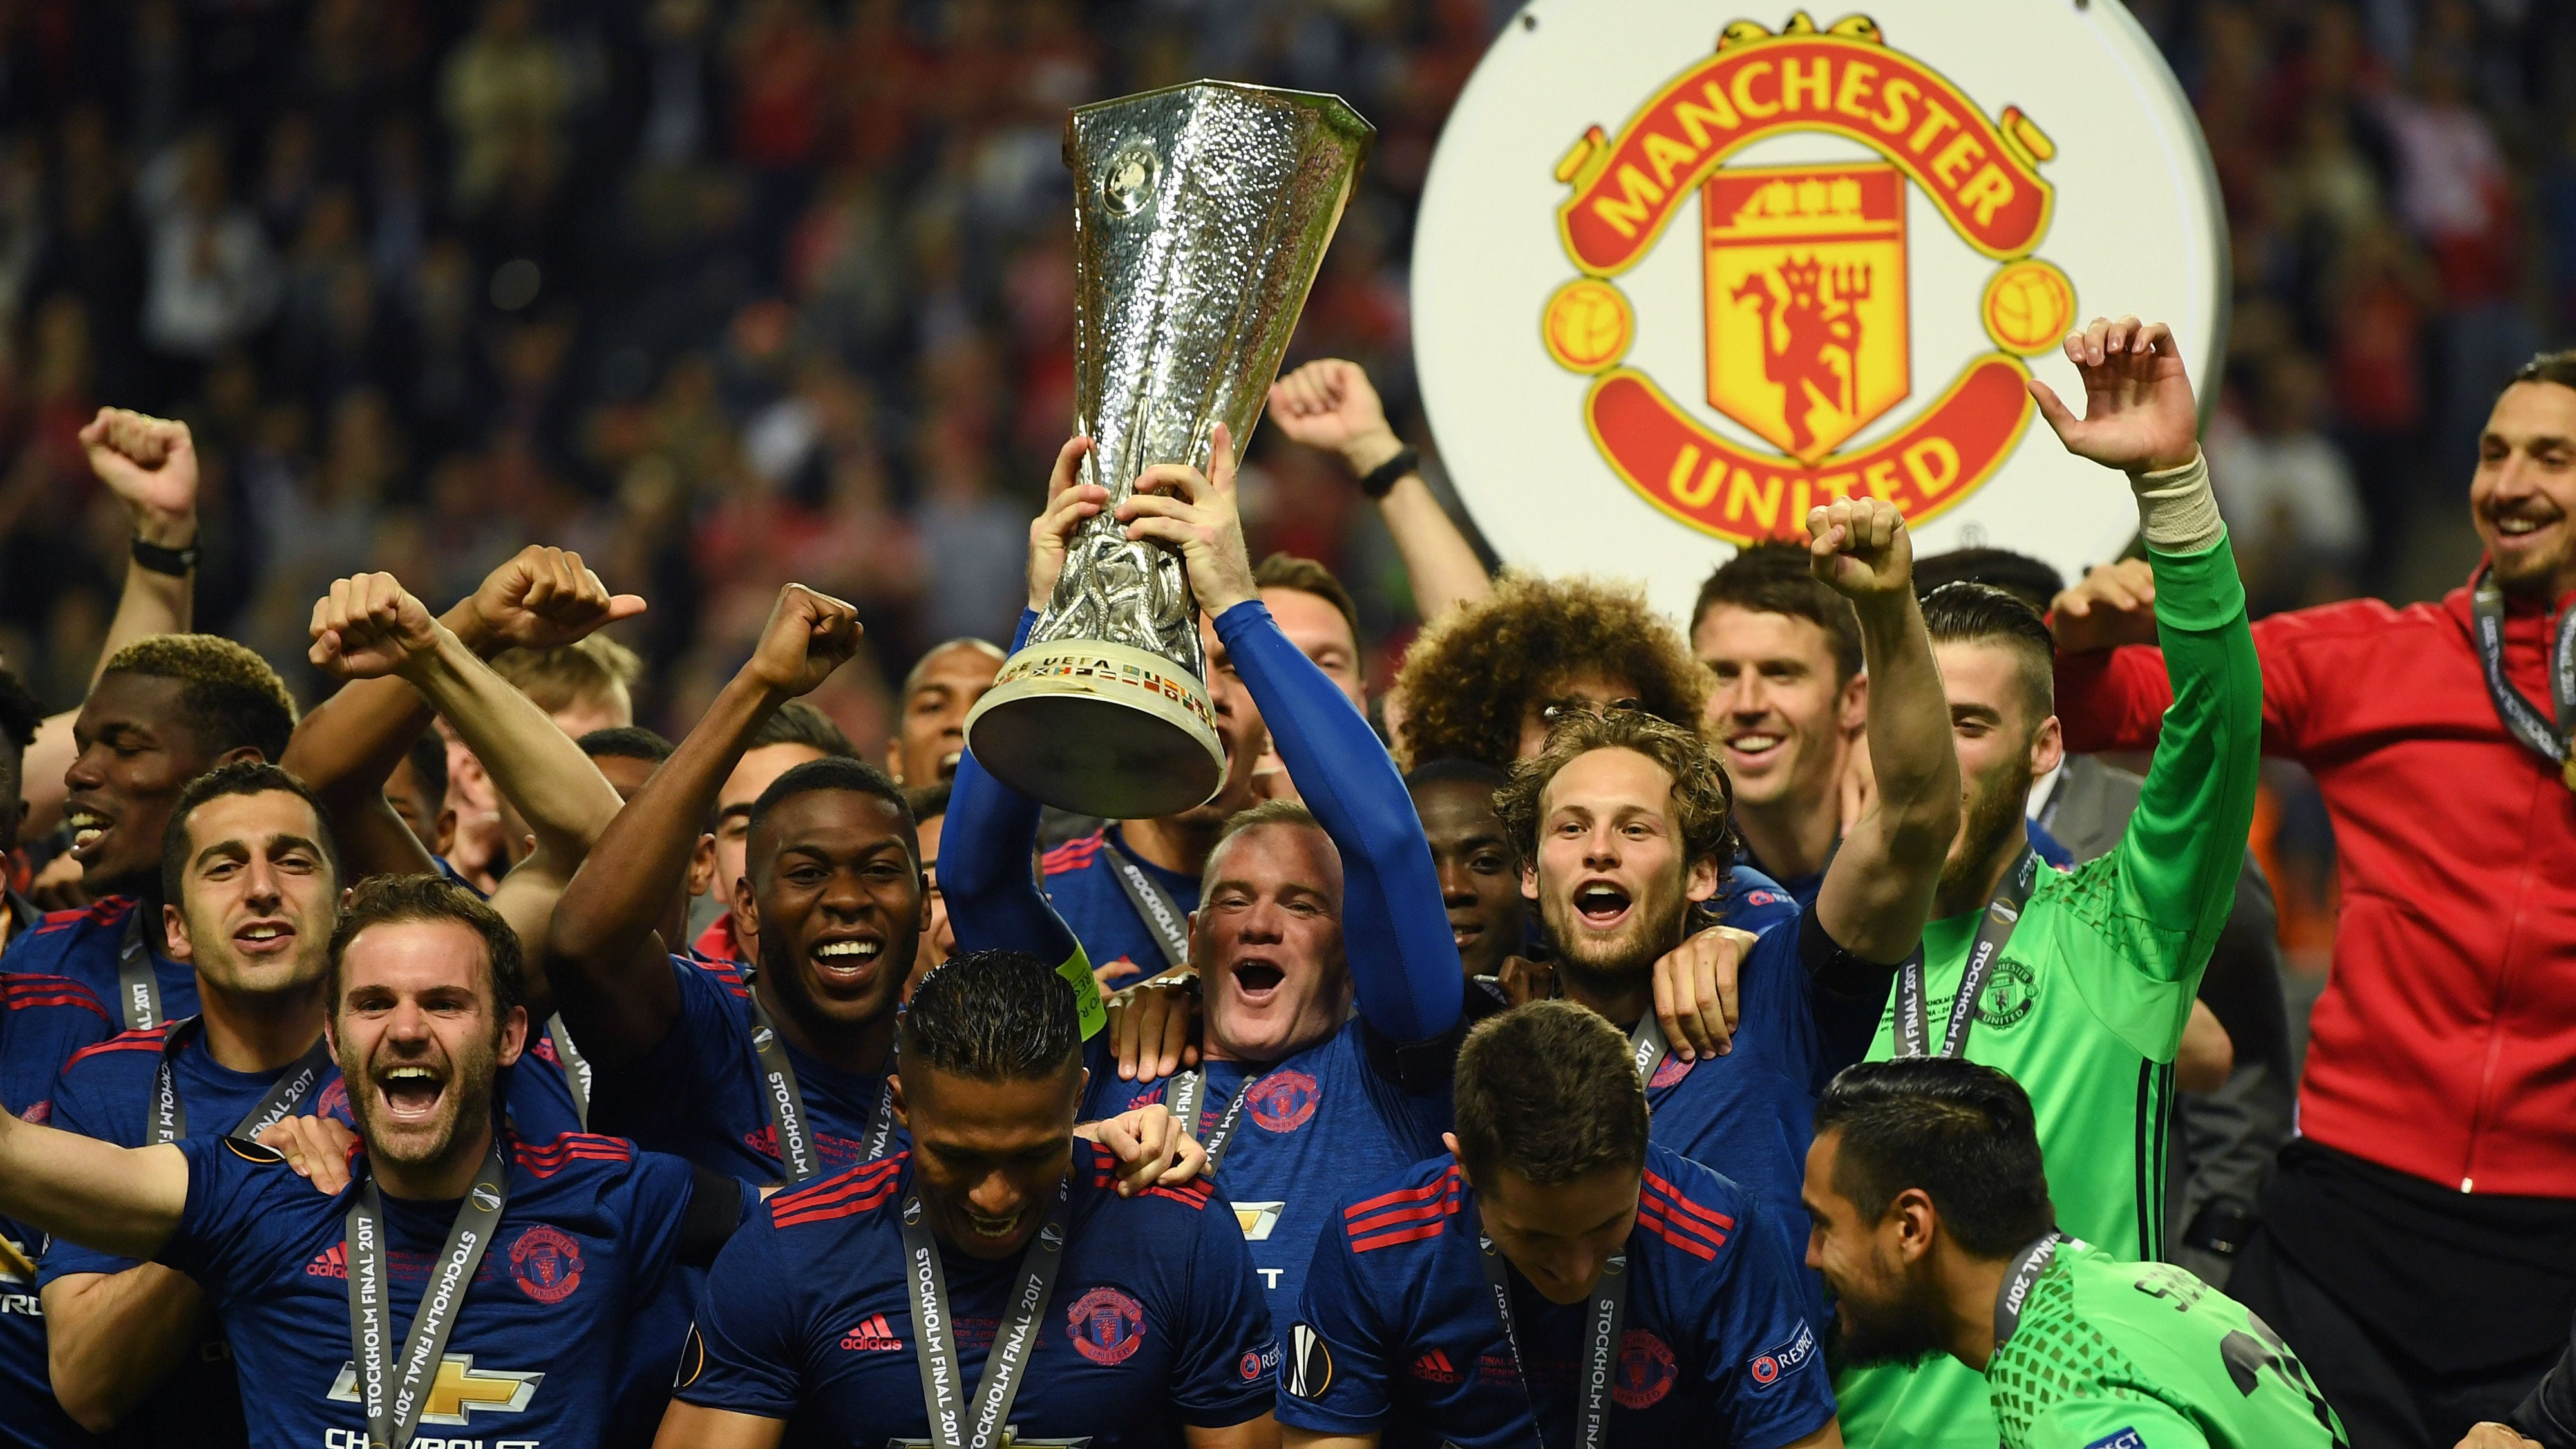 Manchester United Europa League trophy